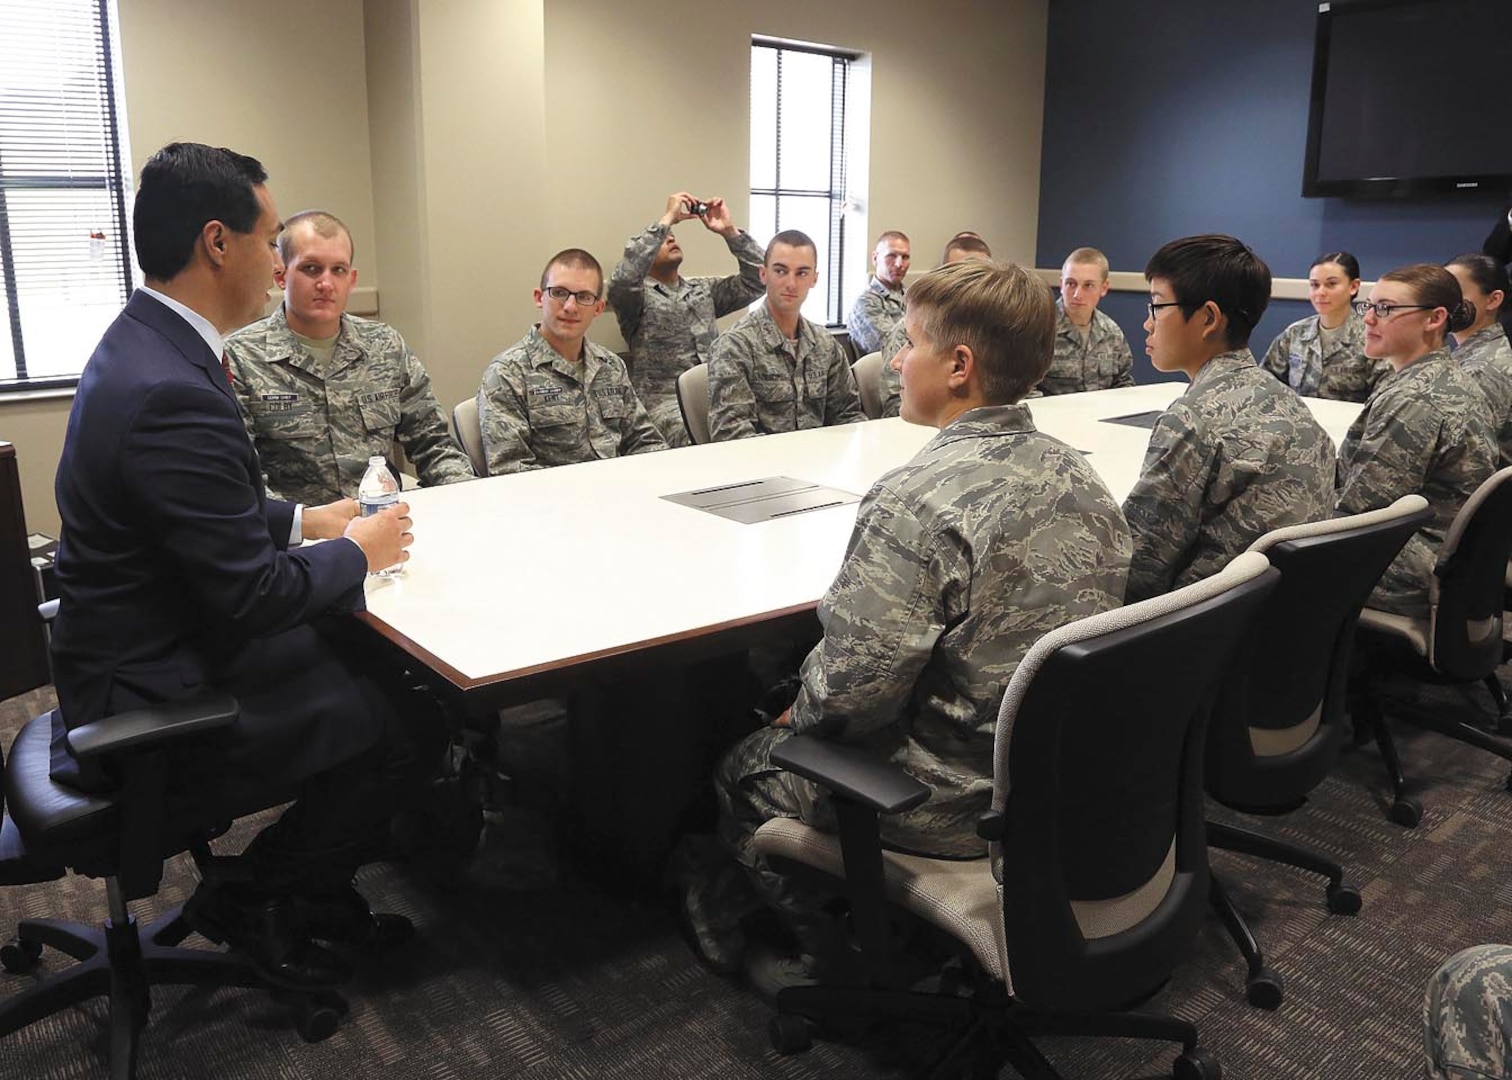 The tour of the new facilities culminated with a round-table discussion between U.S. Rep. Joaquin Castro and ten basic trainees in their seventh week of training. (U.S. Air Force photo by Robbin Cresswell/Released)